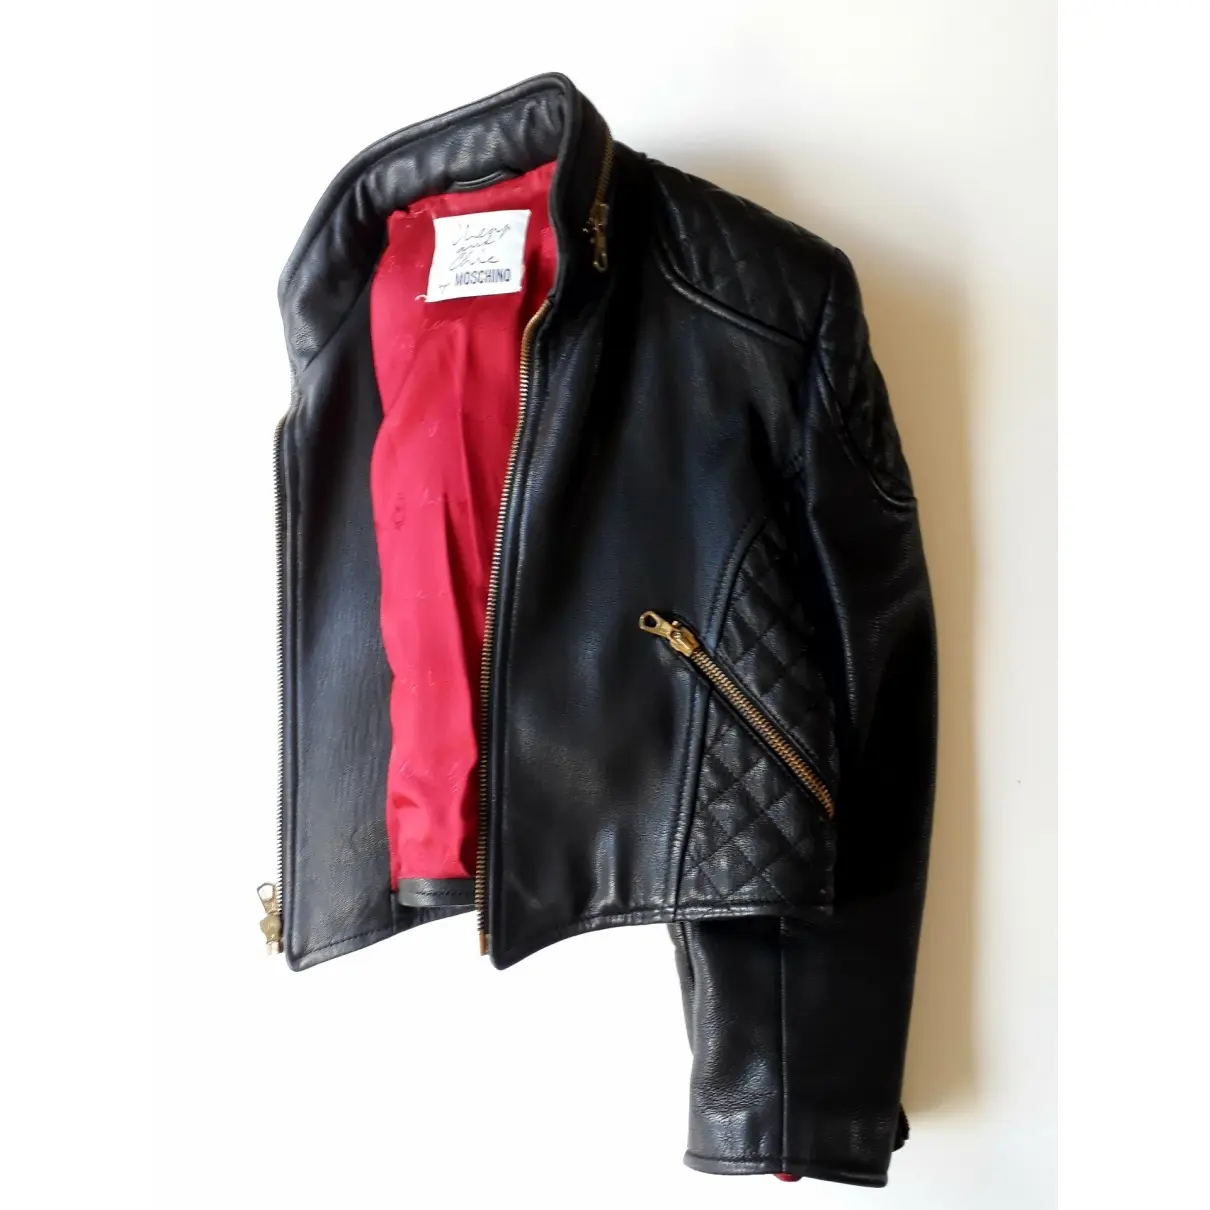 Moschino Cheap And Chic Leather biker jacket for sale - Vintage